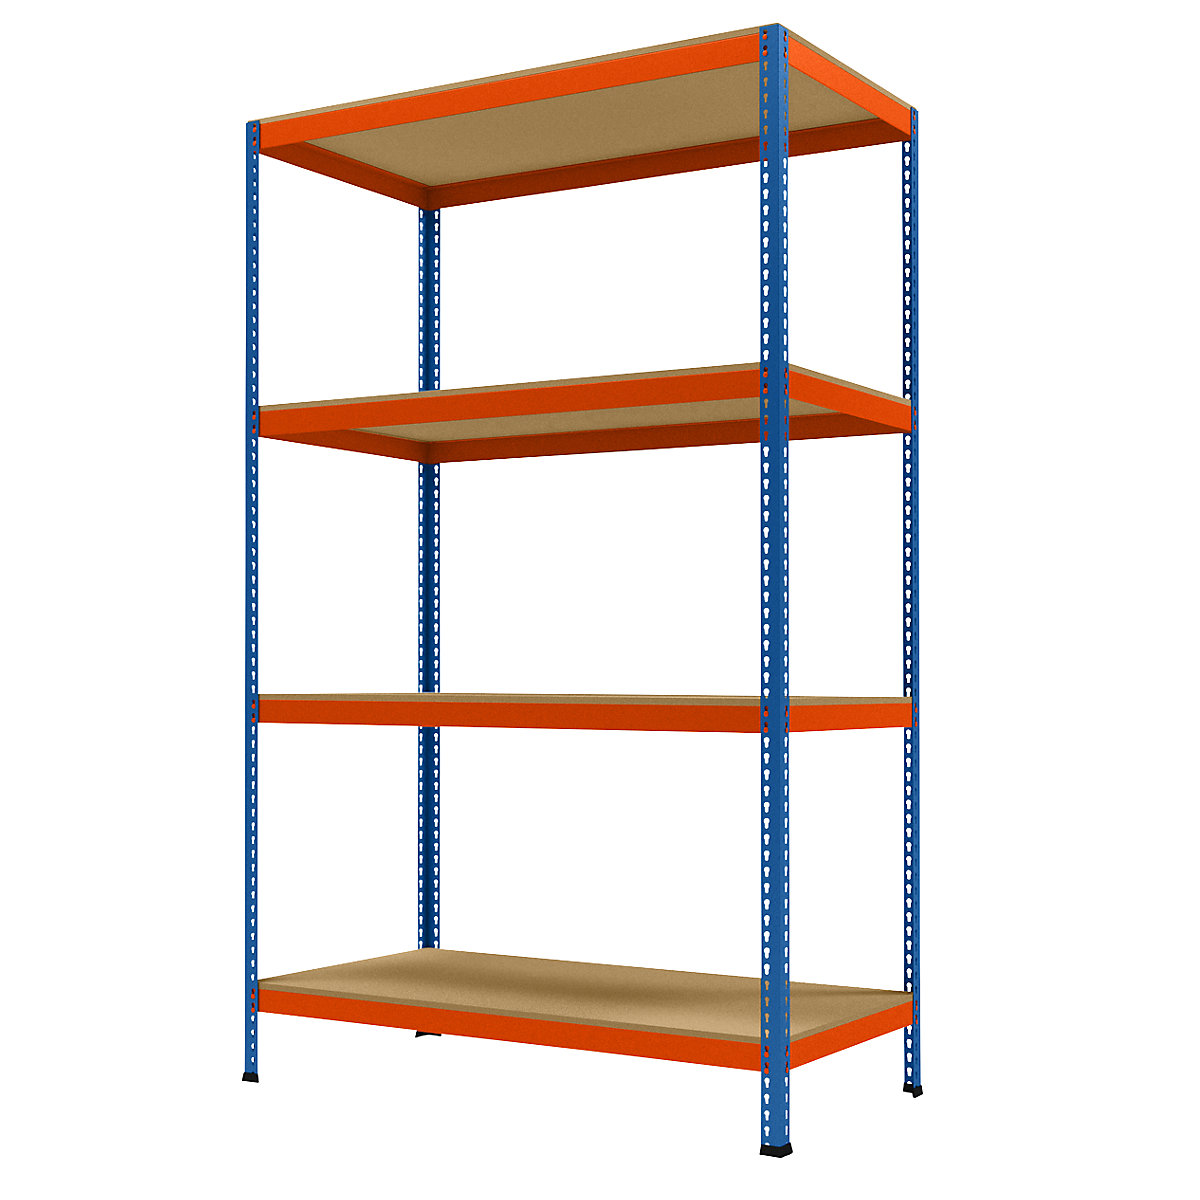 Wide span heavy duty shelving, height 2438 mm, overall depth 773 mm, width 1536 mm